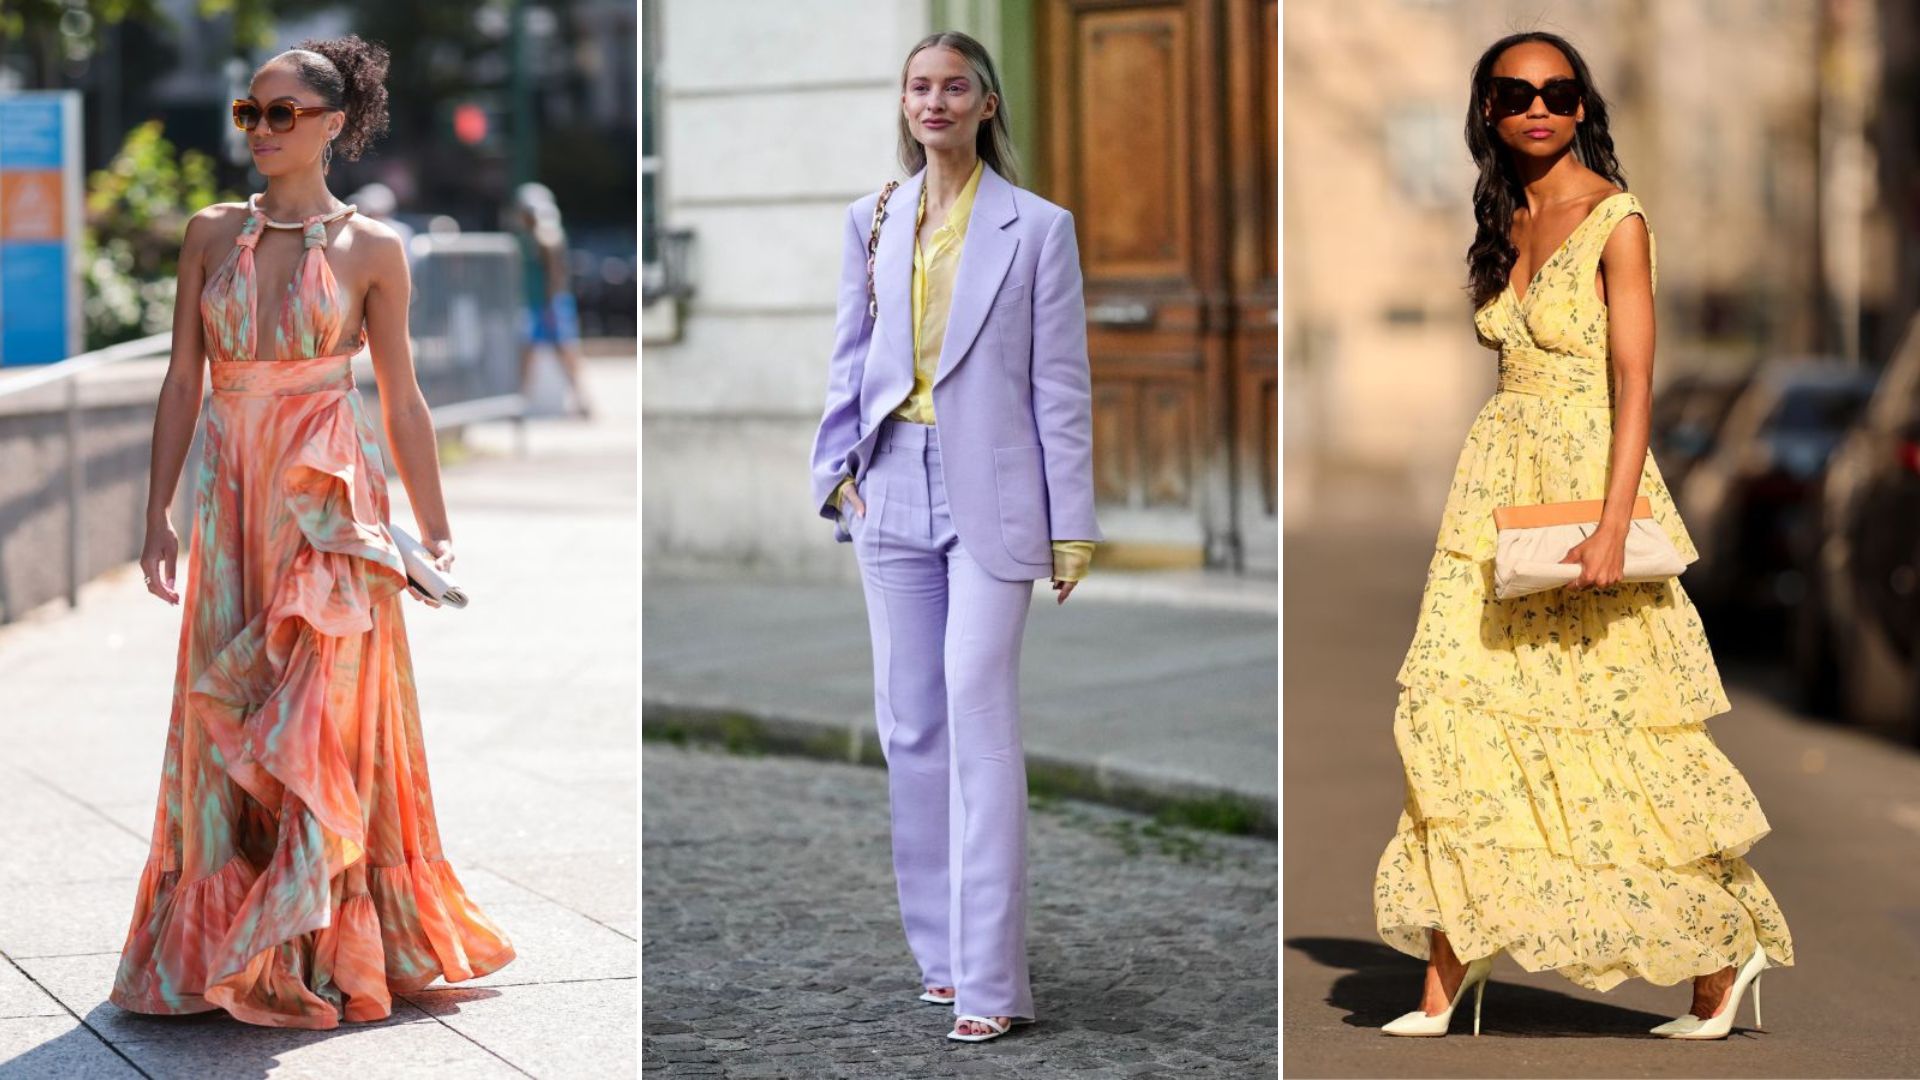 It's Wedding Season! Your Guide to Petite-Friendly Wedding Guest Attire